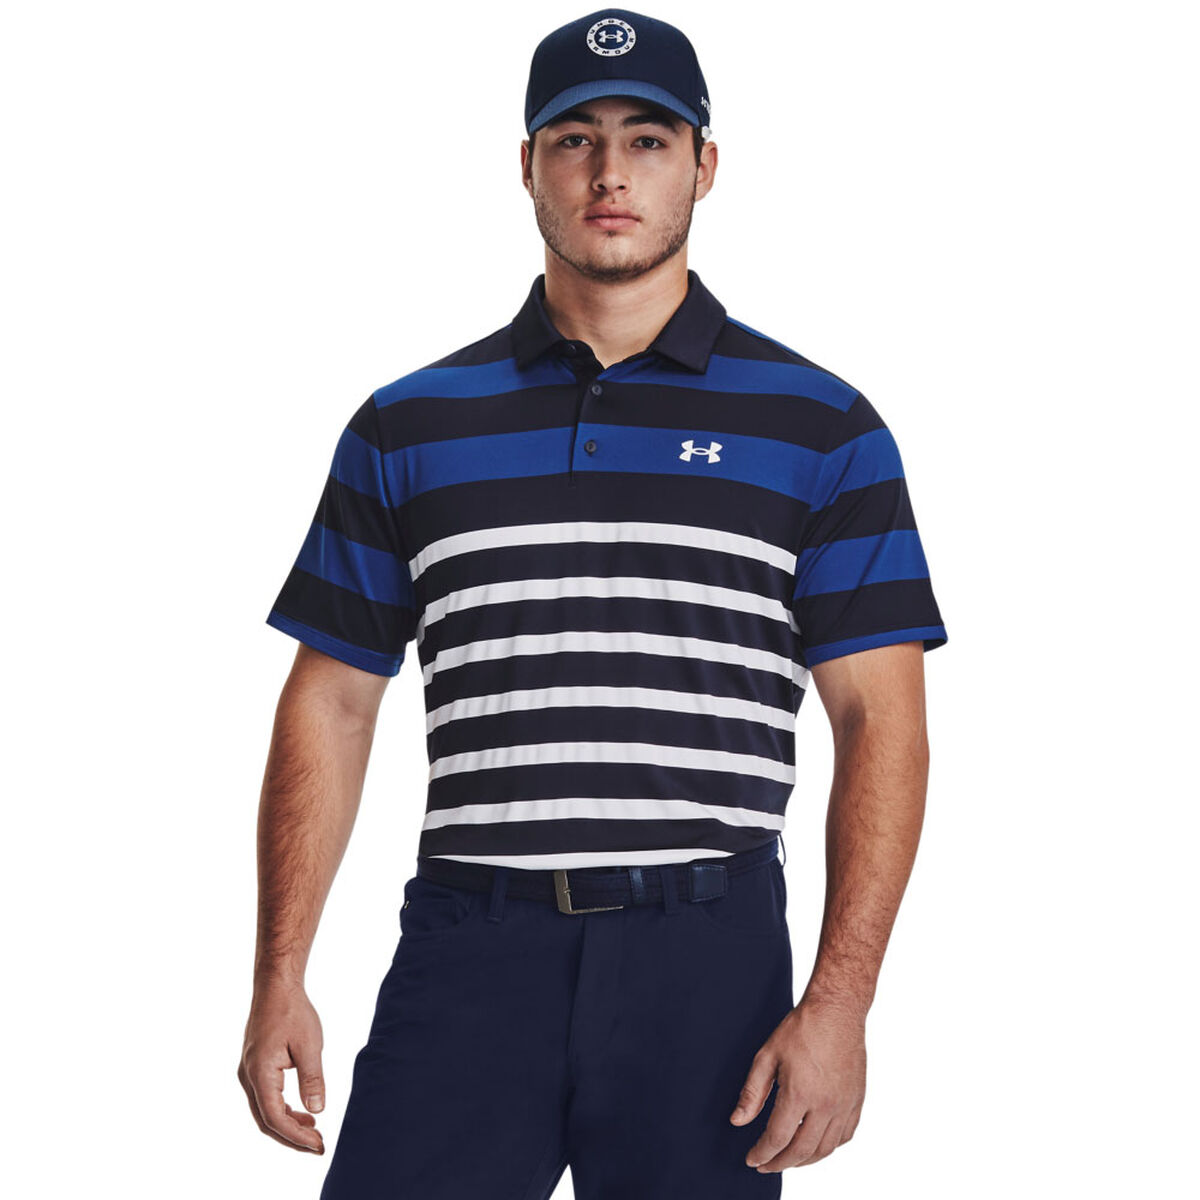 Under Armour Men’s Navy Blue and White Playoff 3.0 Rugby YD Stripe Golf Polo Shirt, Size: Small | American Golf